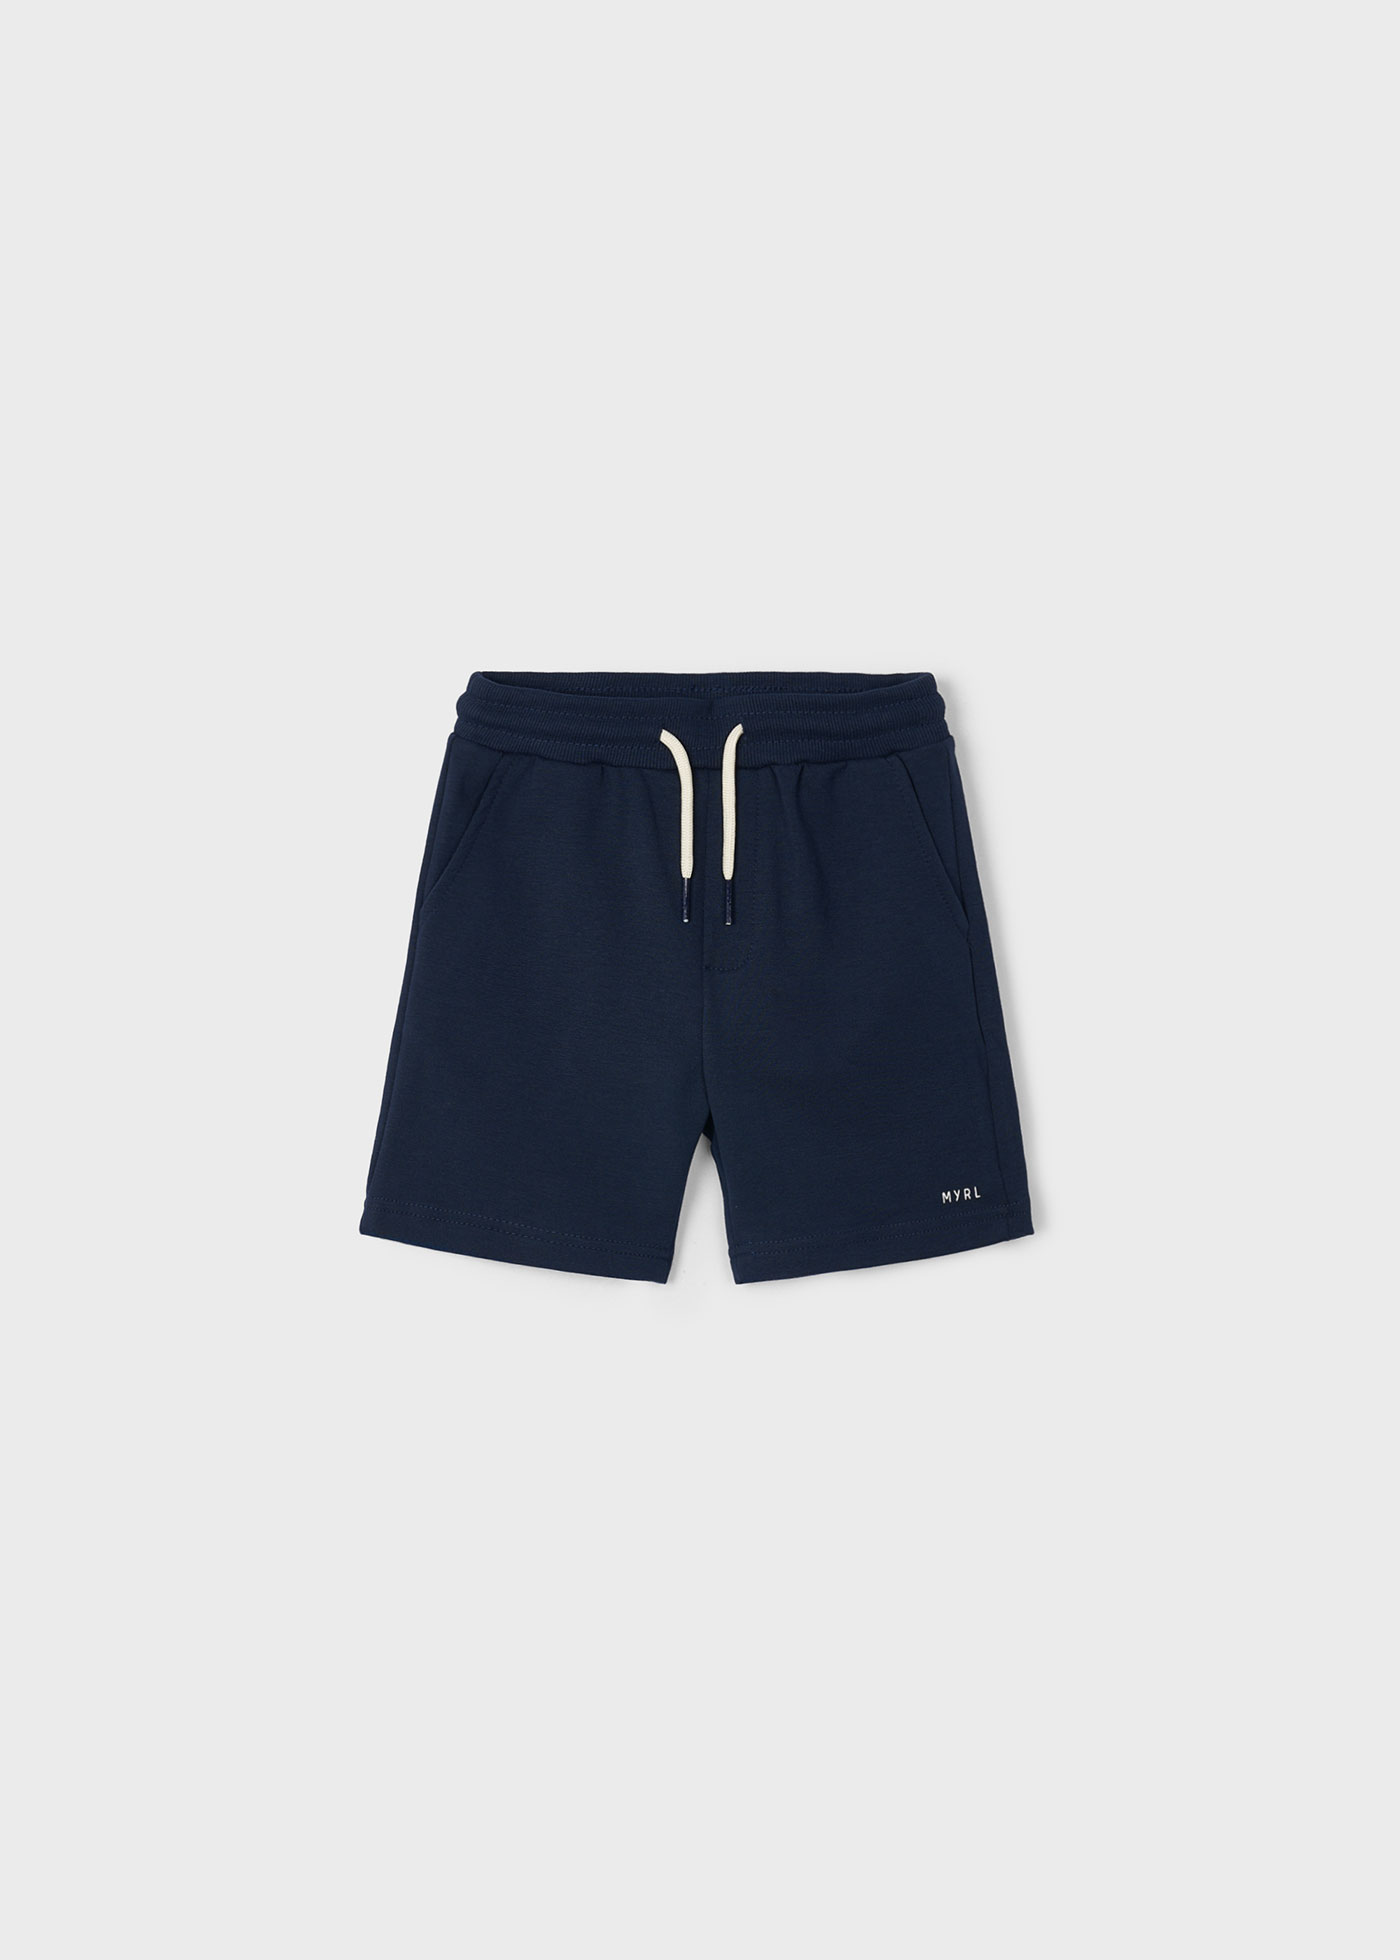 Boys french terry shorts